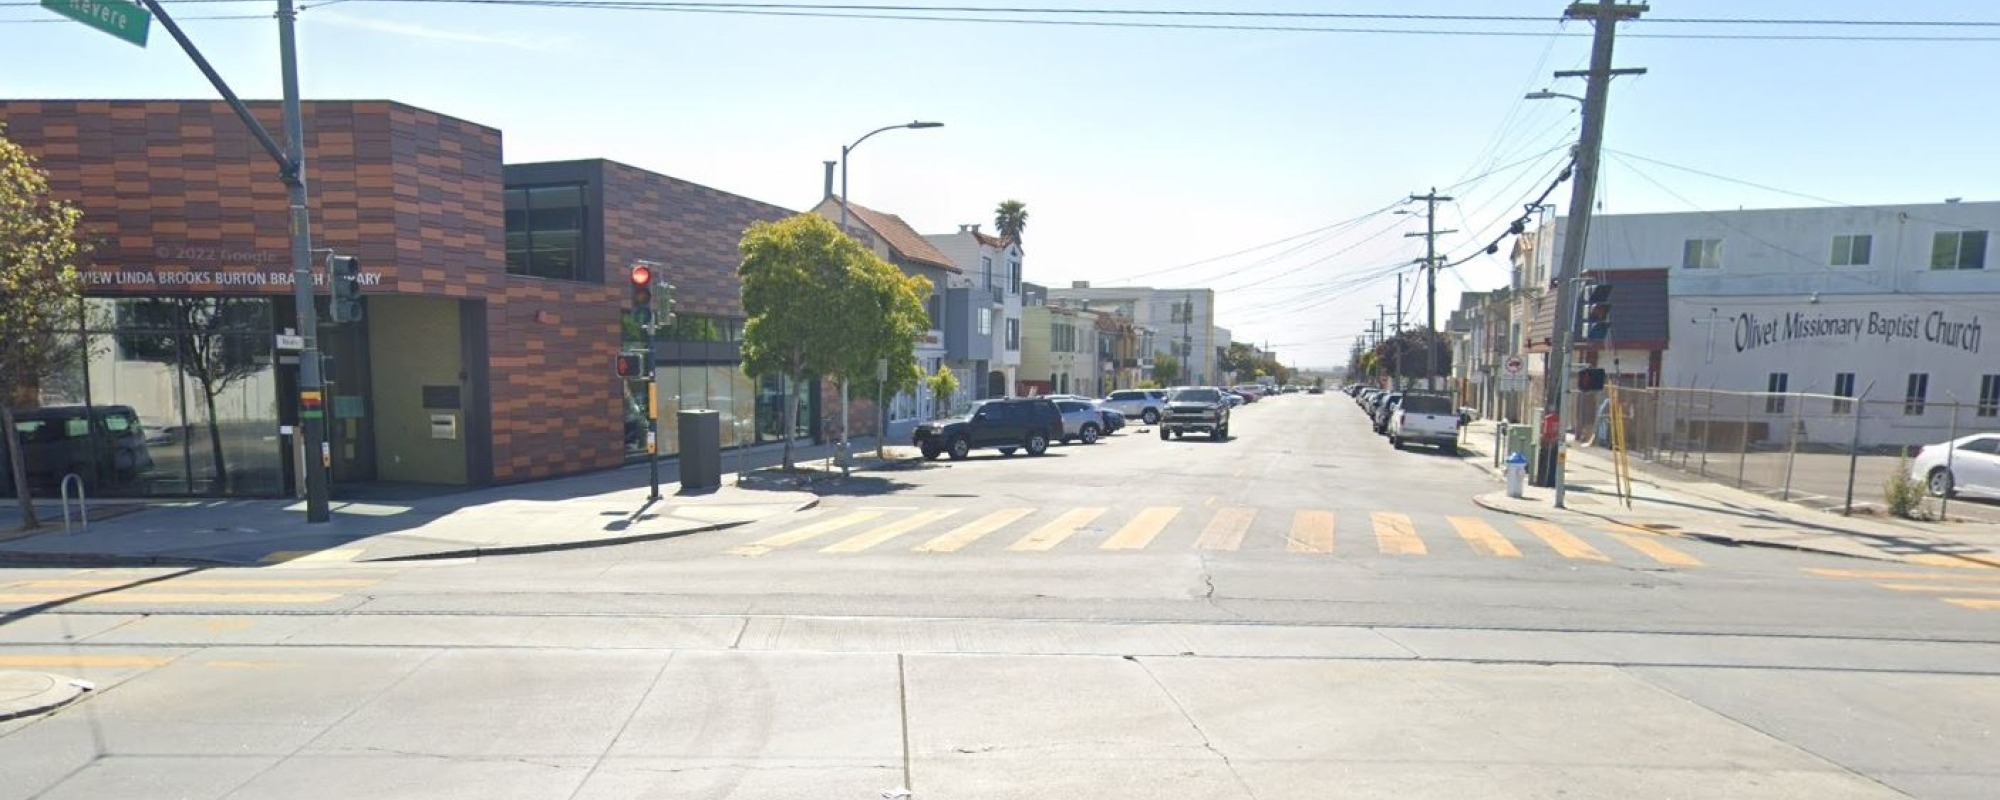 Street view of 3rd Street and Revere Street Intersection